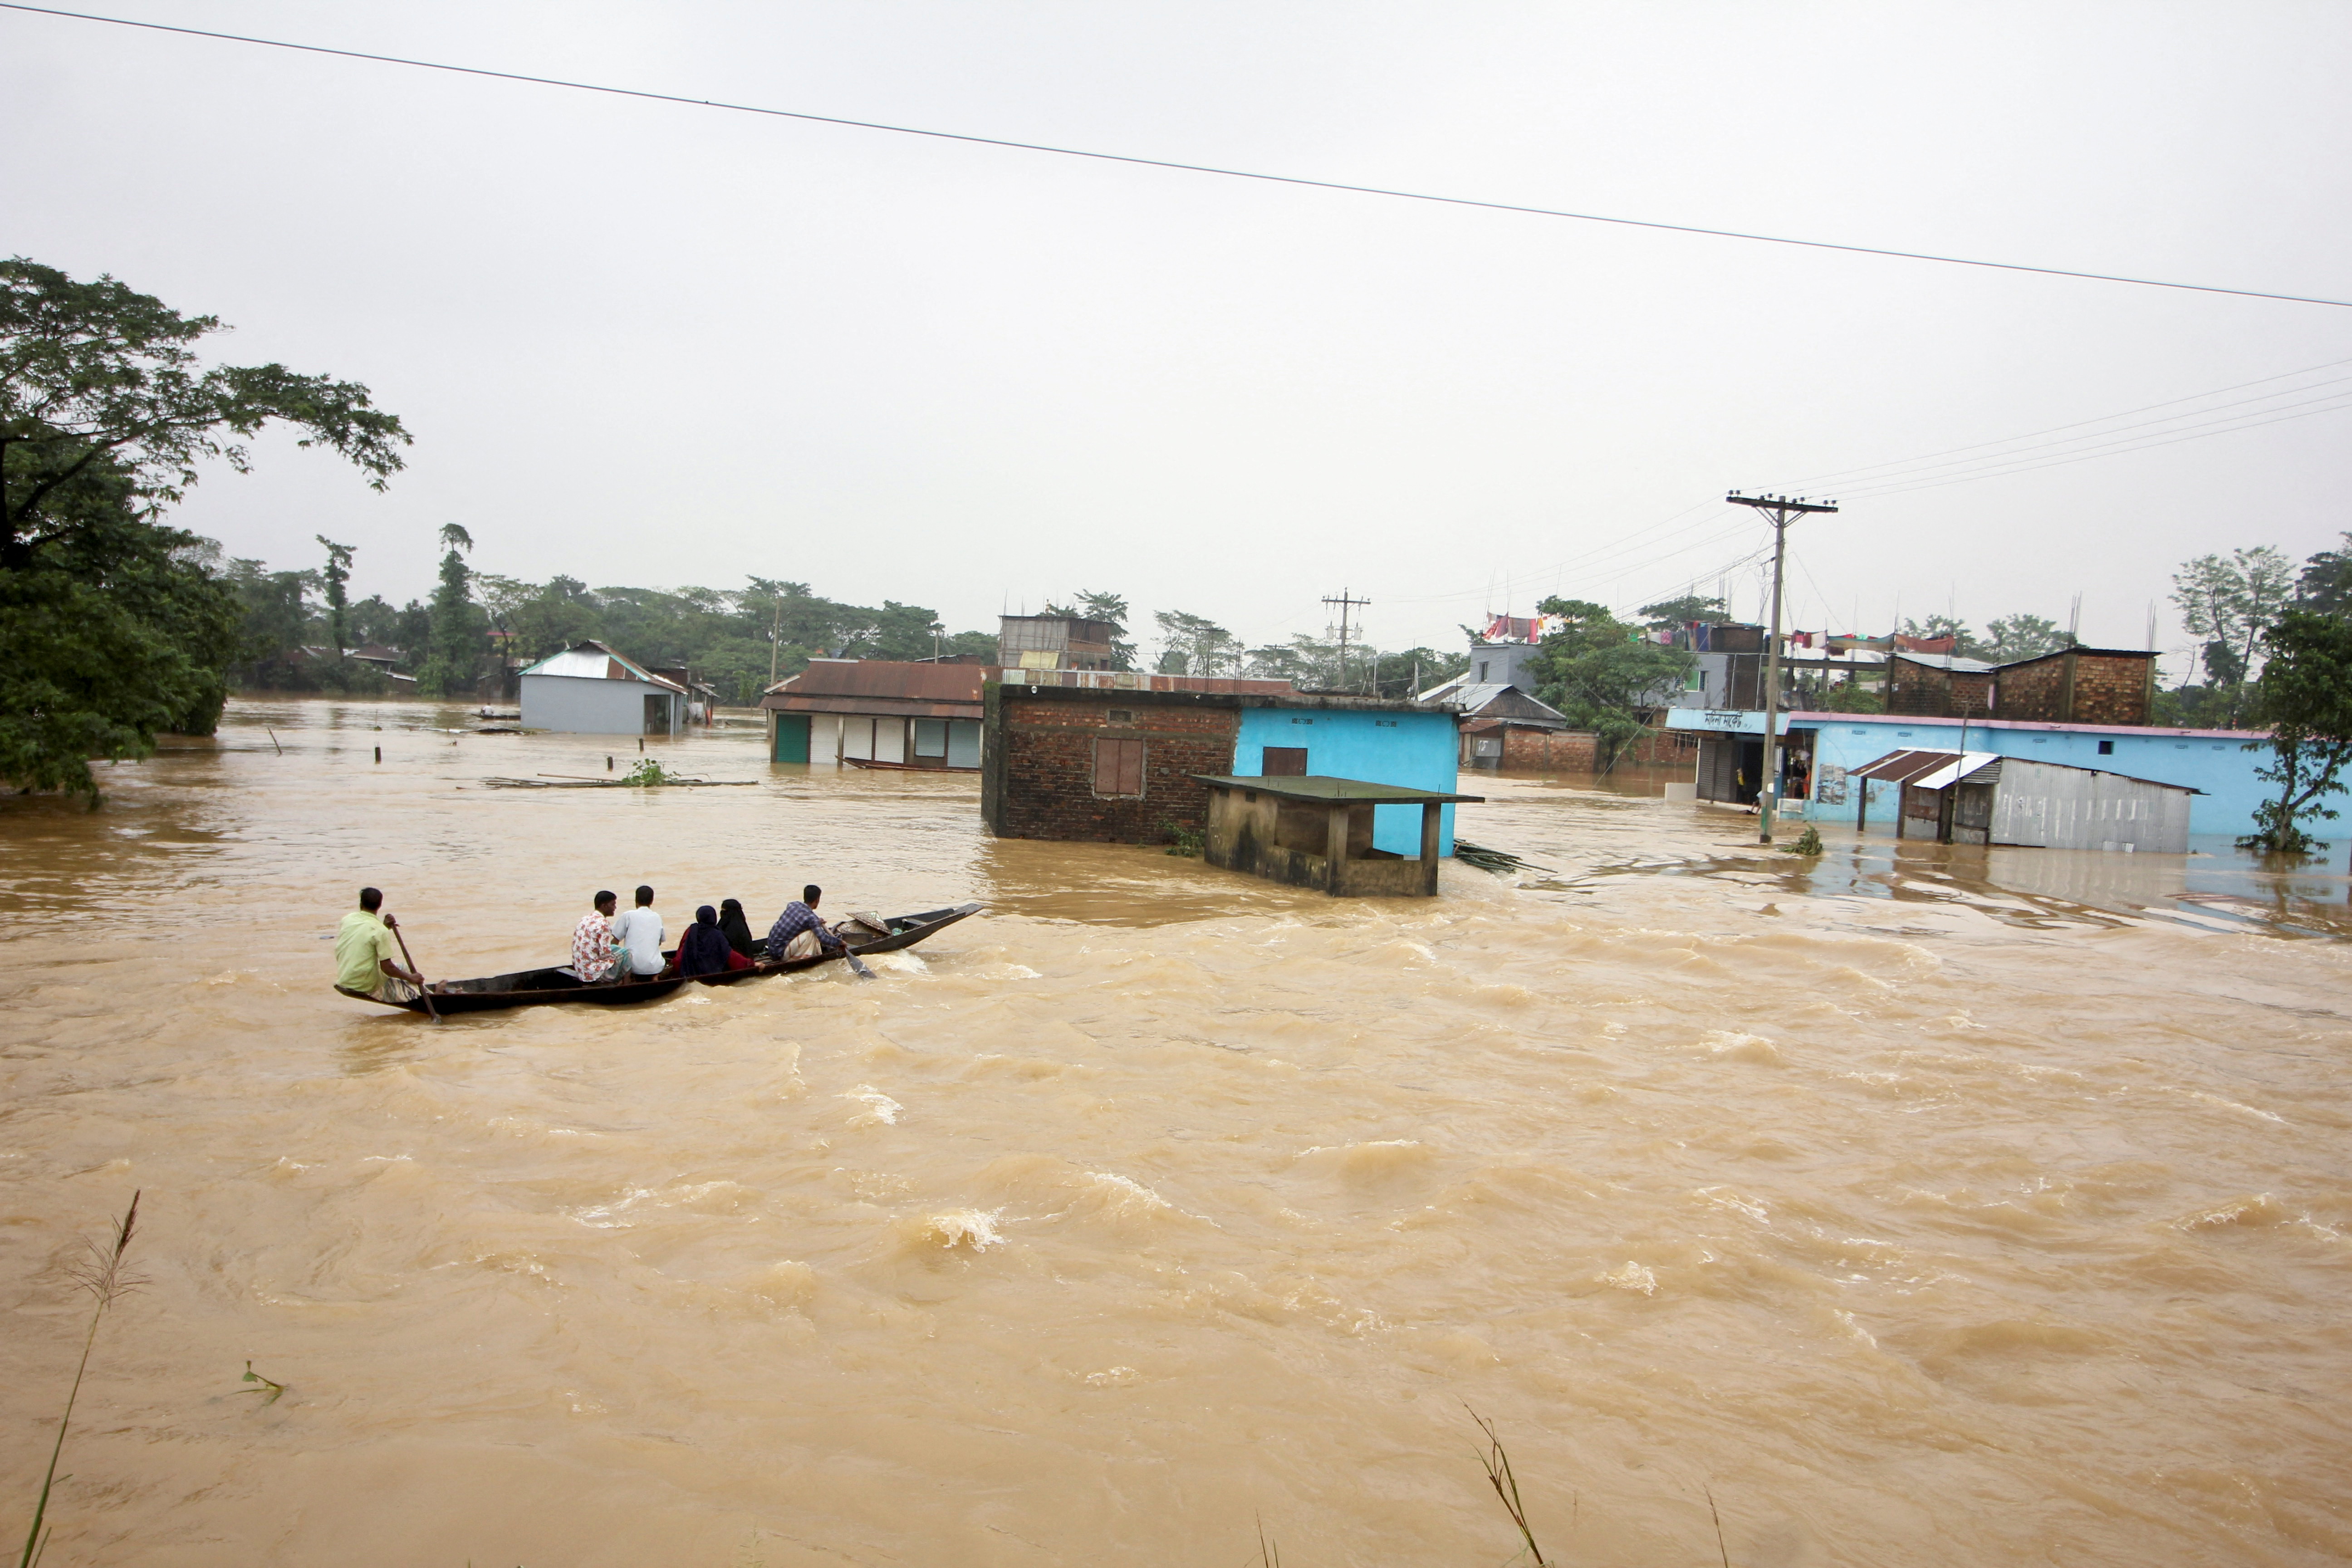 People move a boat in a flooded area during a widespread flood in Sylhet